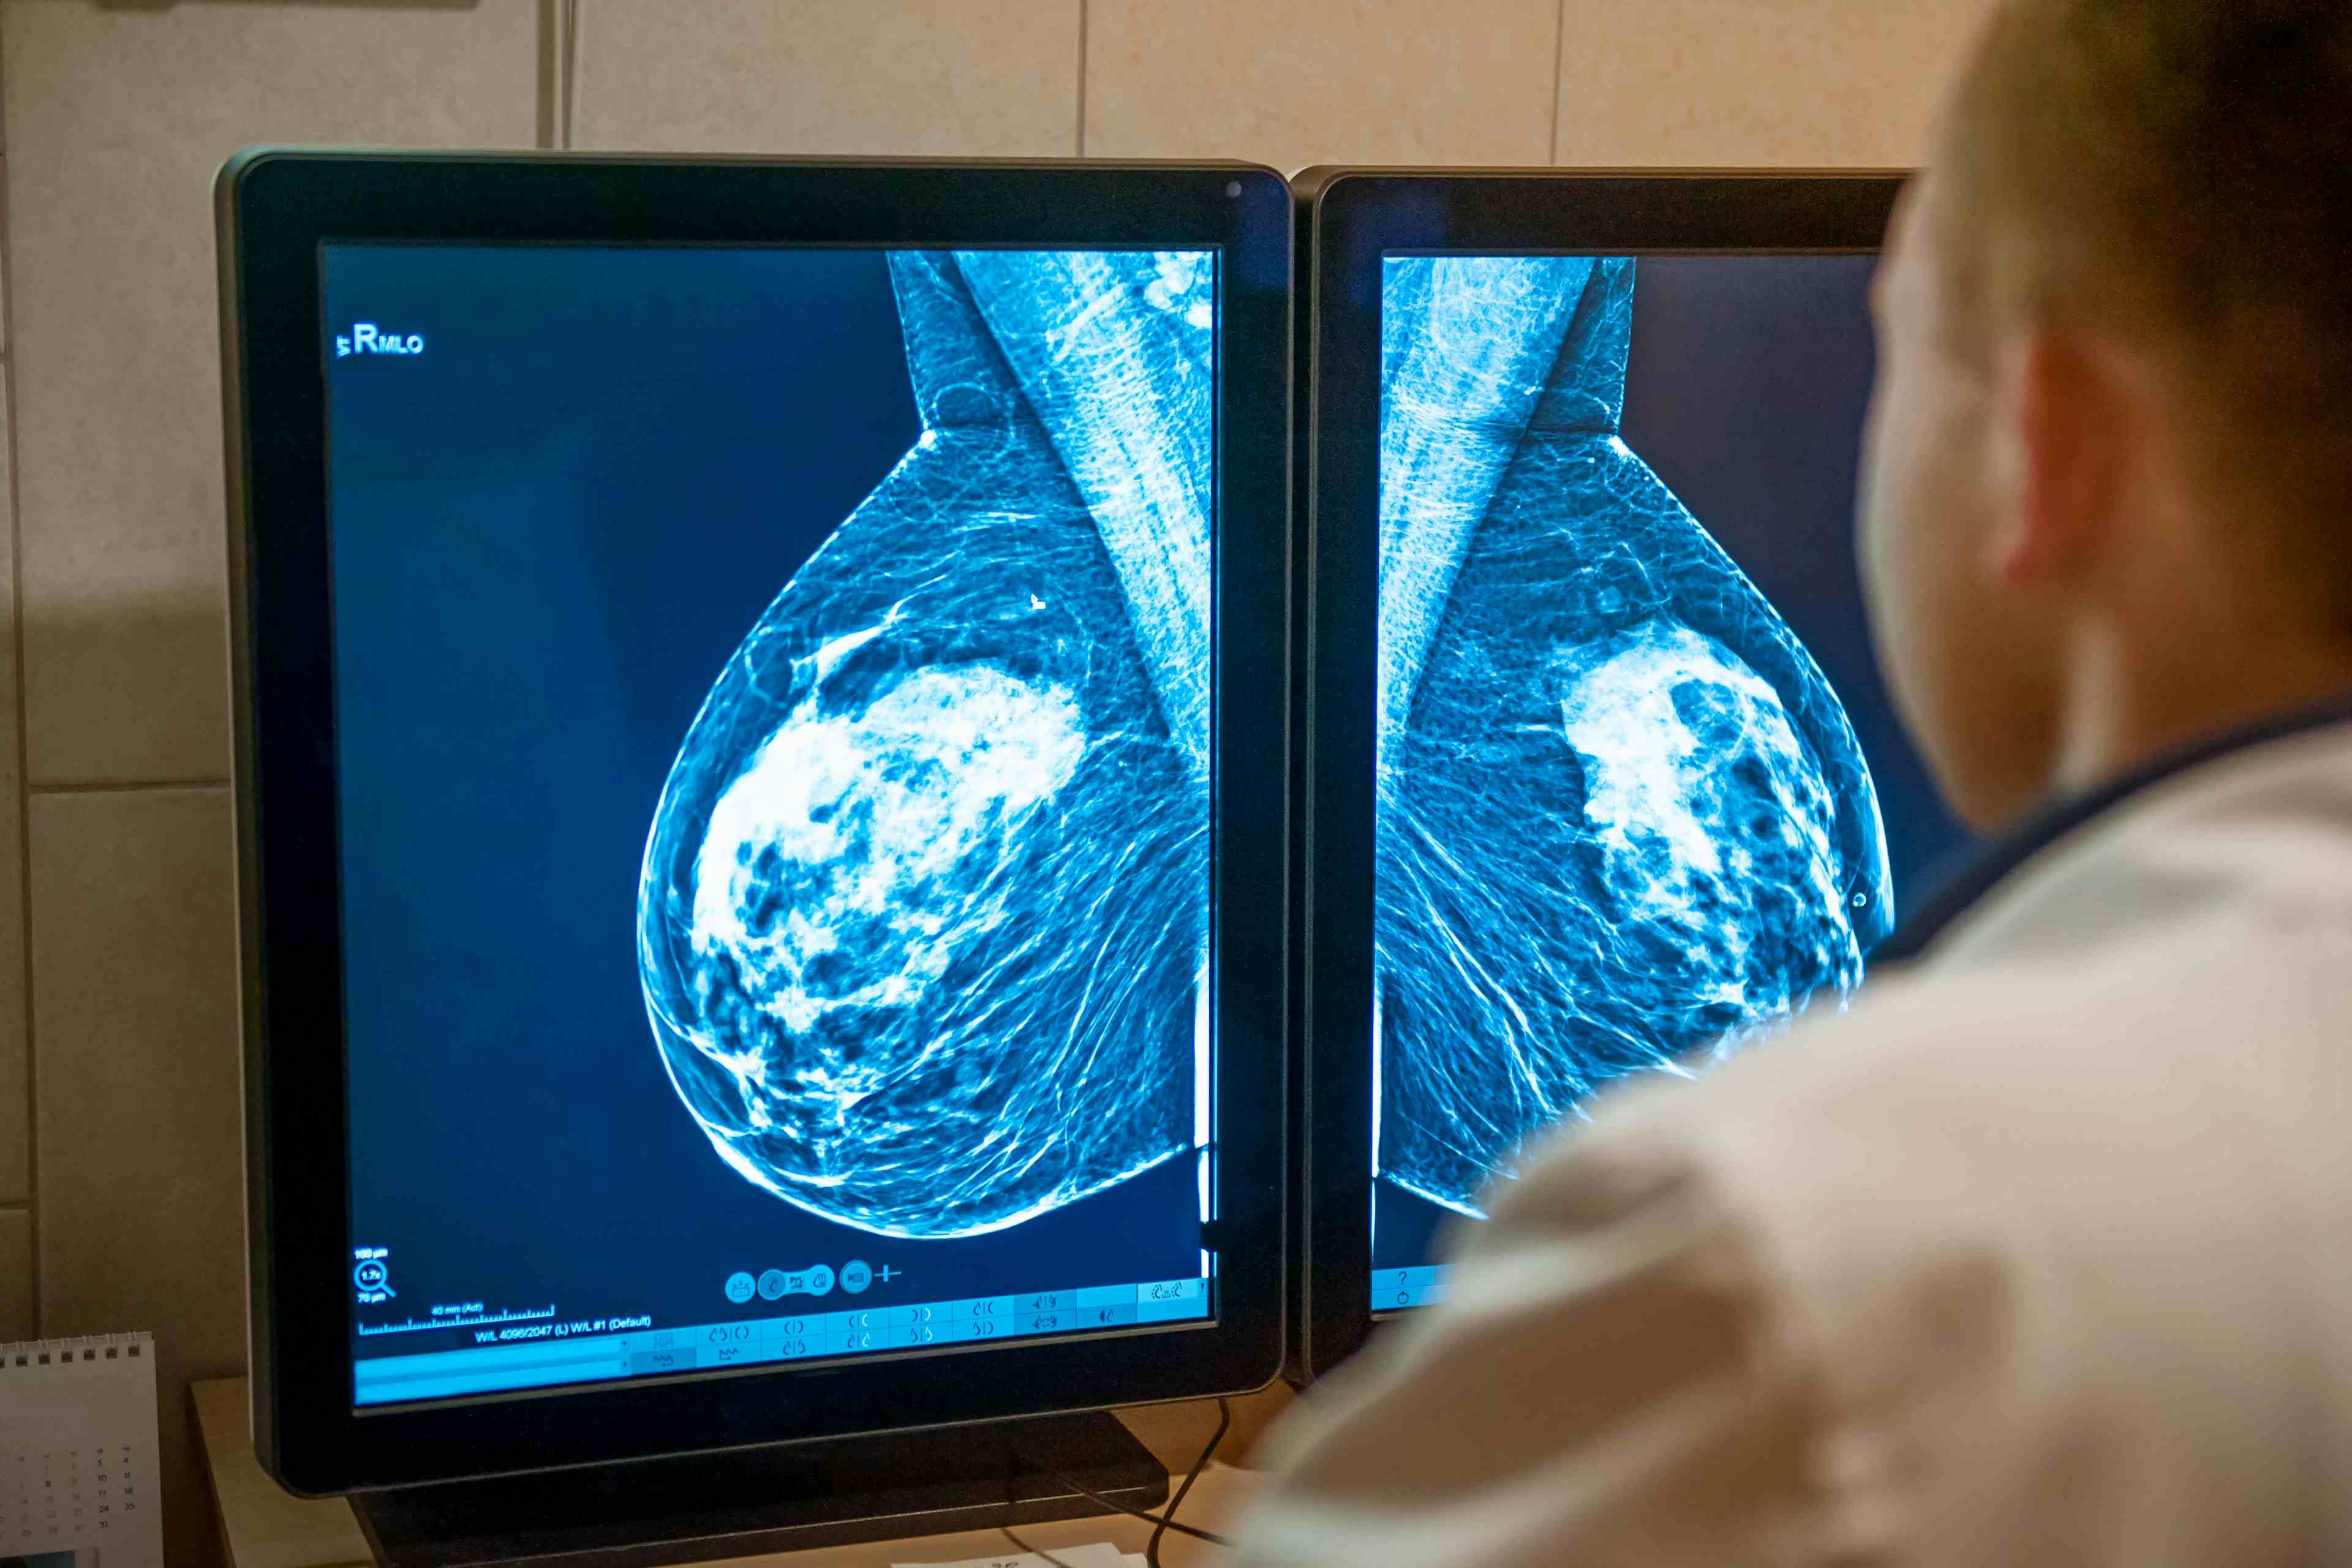 Doctor examines mammogram snapshot of breast of female patient on the monitors | Image Credit: okrasiuk - stock.adobe.com